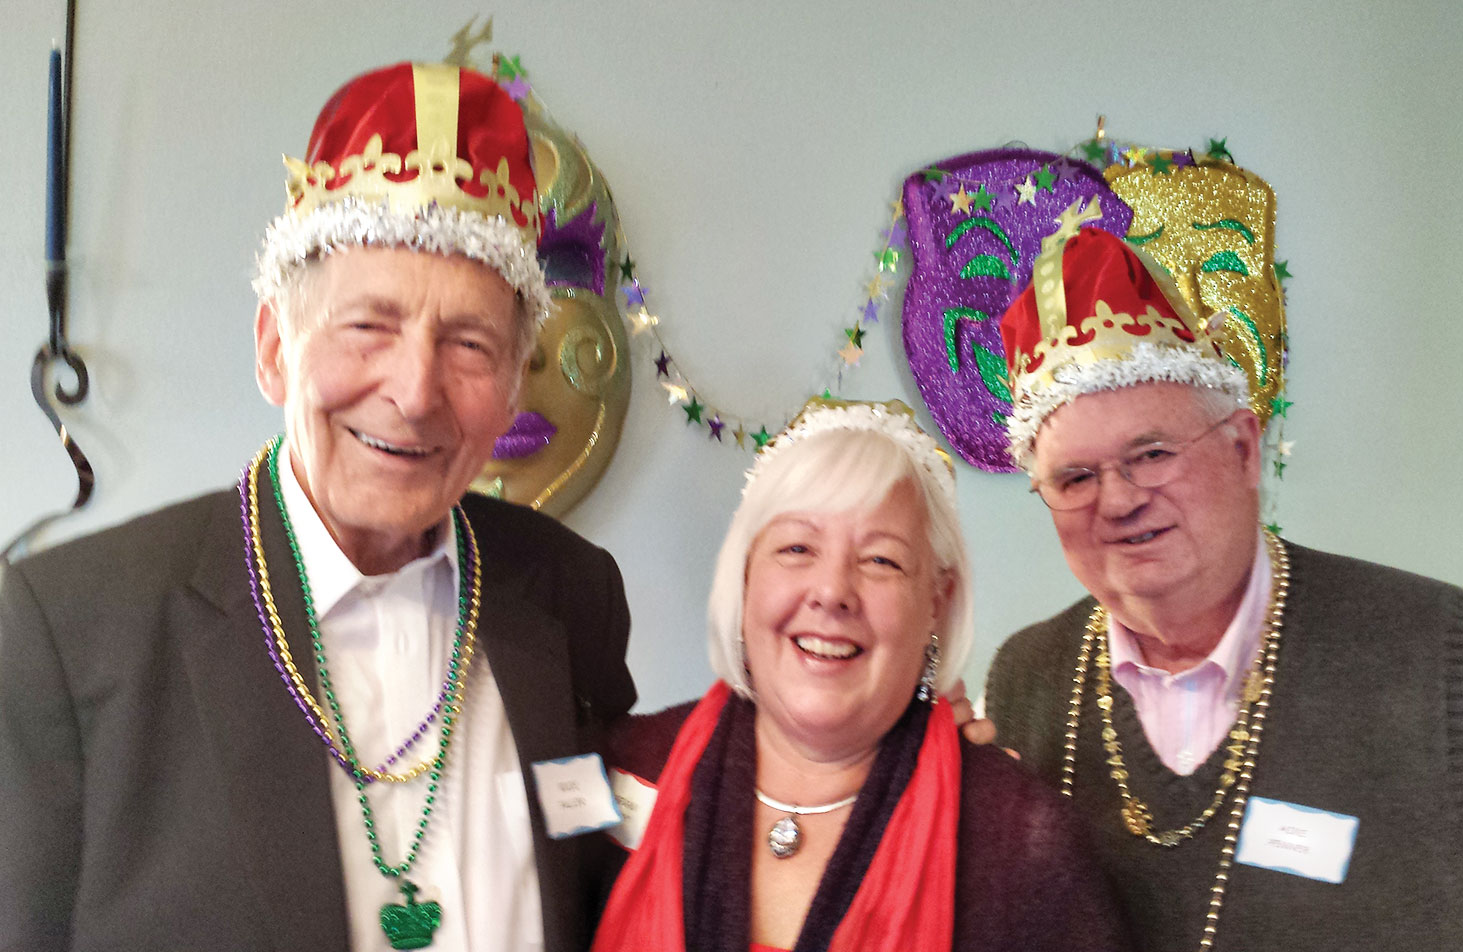 King Rudi Faller, Queen Fran Lowry and King Mike Penner honored at La Chandeleur Crepe Party